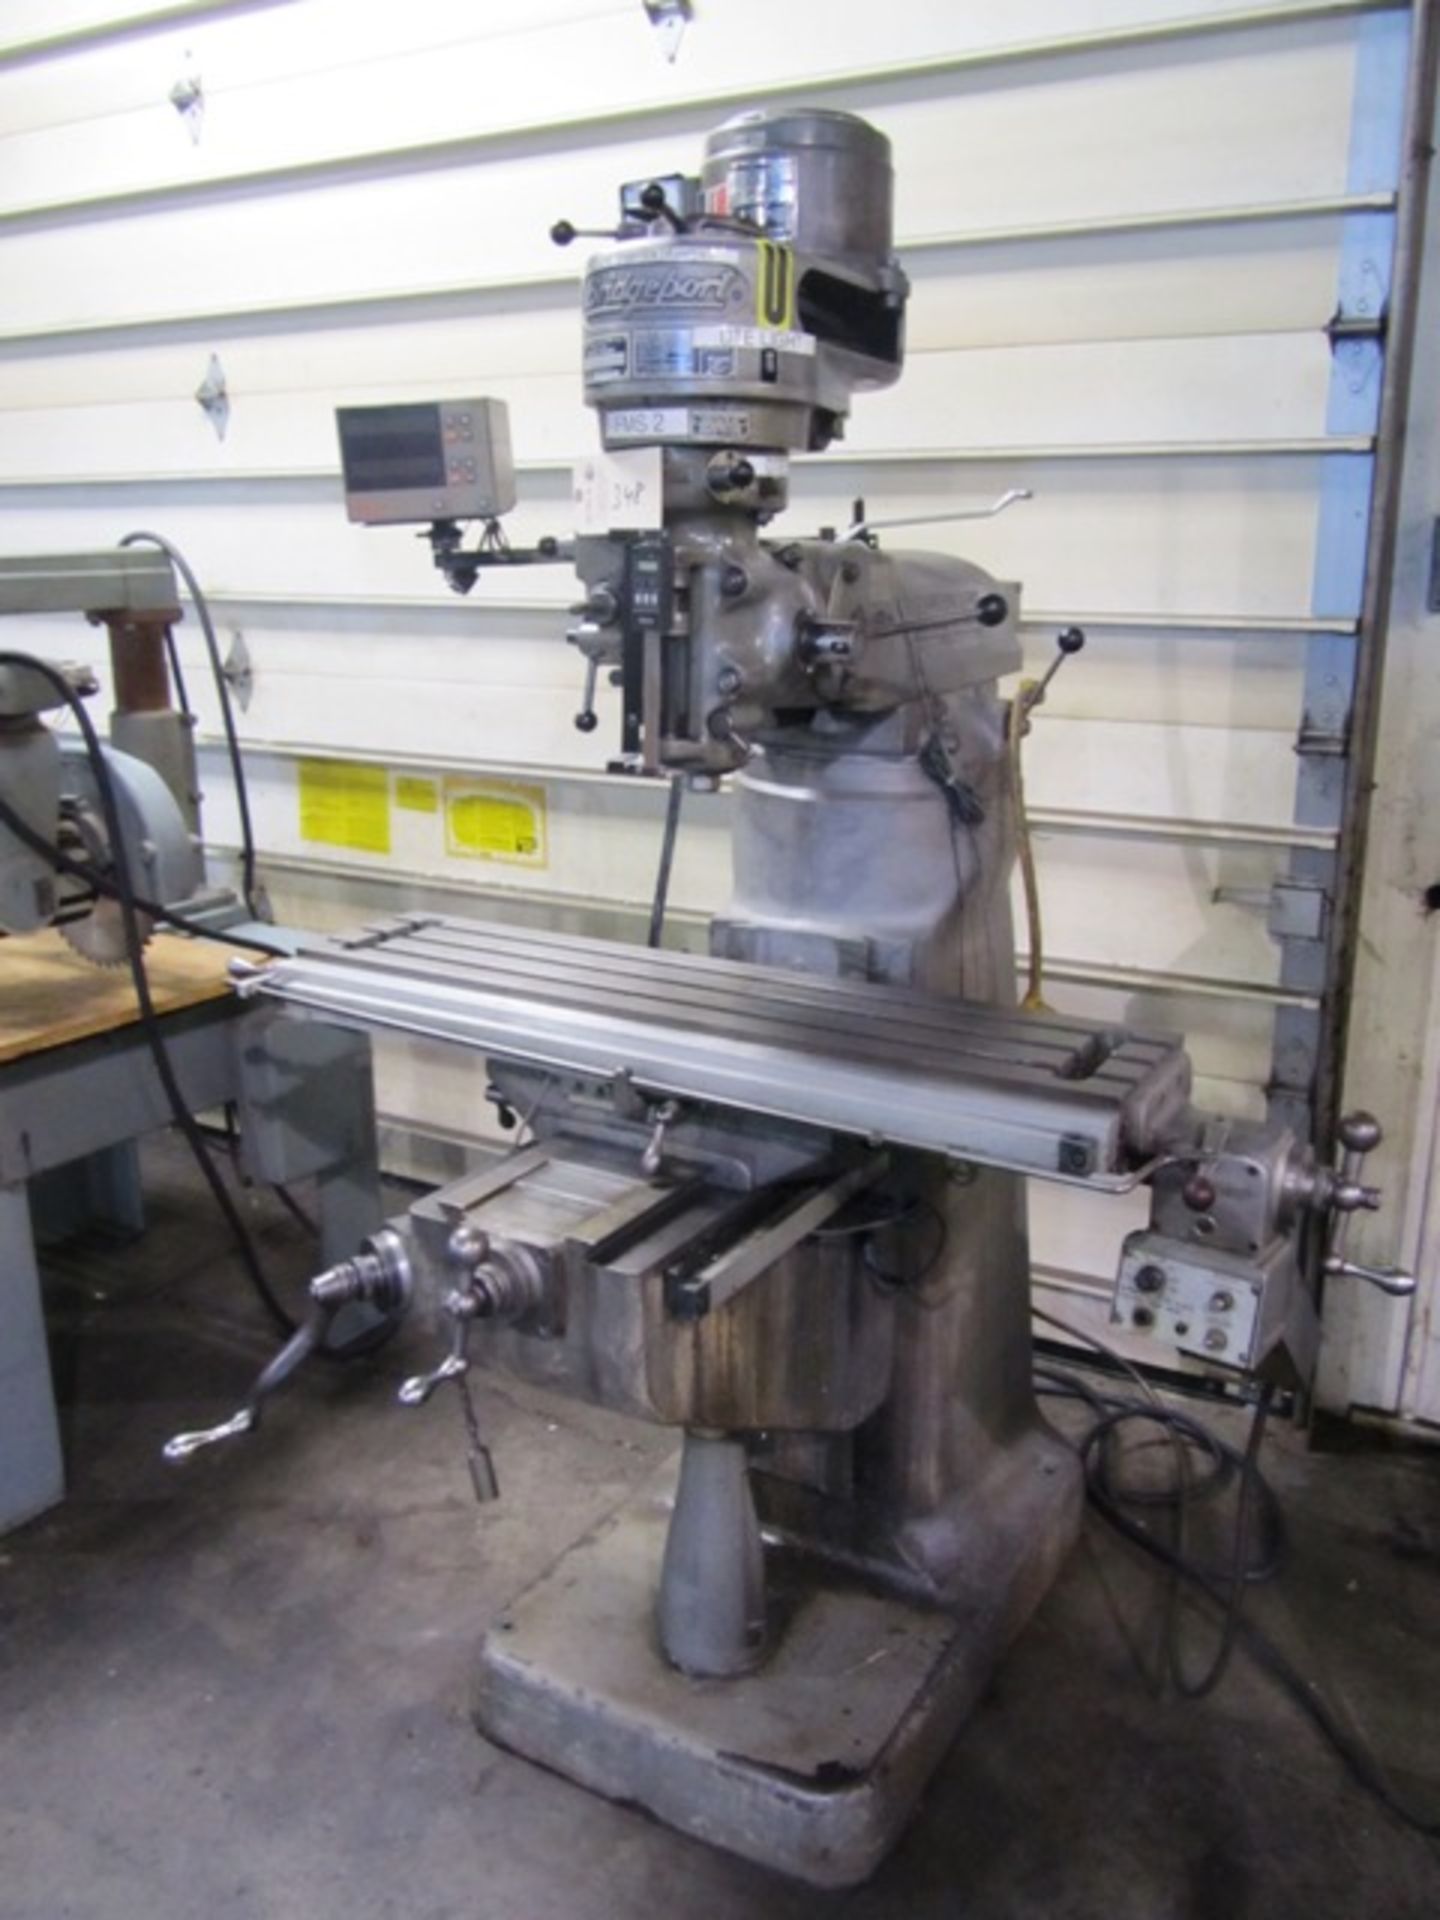 Bridgeport Vertical Milling Machine with 9'' x 42'' Power Feed Table, R8 Taper, Spindle Speeds to